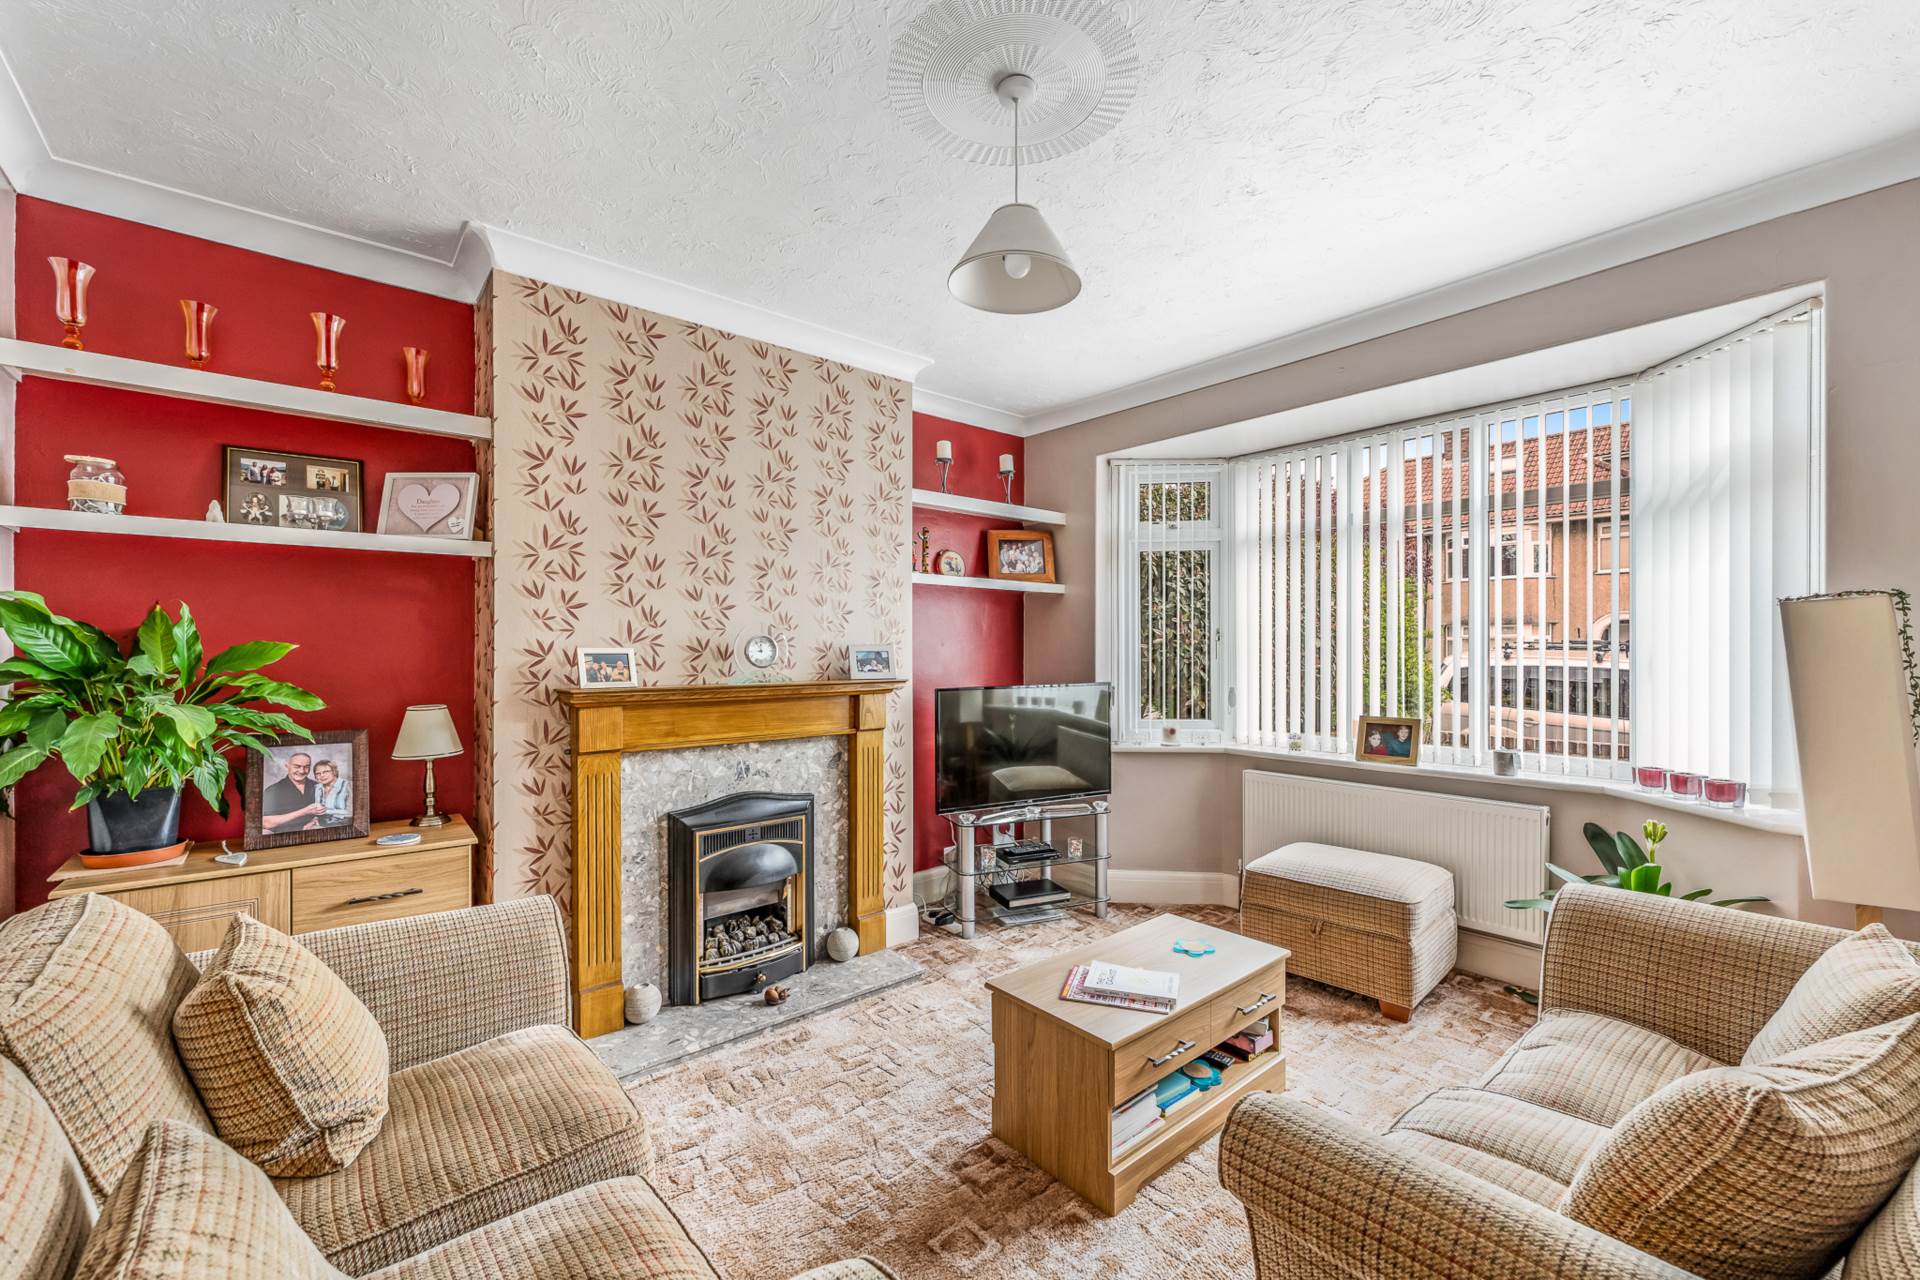 Shaftesbury Road - Stunning Family Home, Image 4